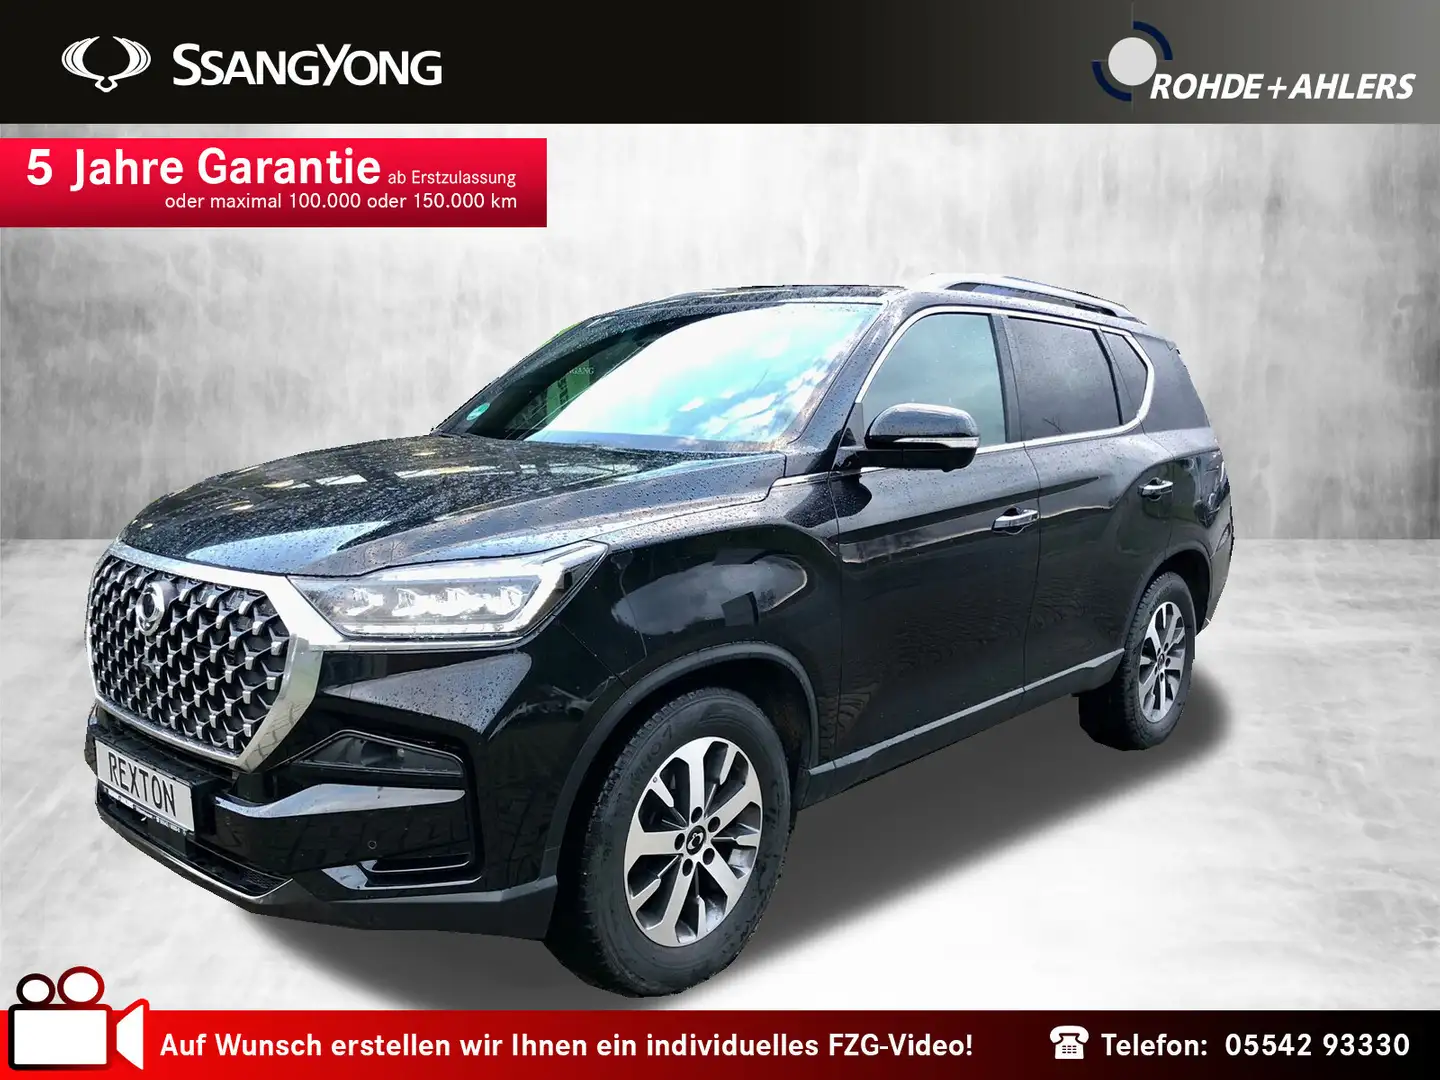 SsangYong Rexton Rexton 2.2 D 8AT Sapphire 4WD ELEGANCE+AHK+3,5To crna - 1